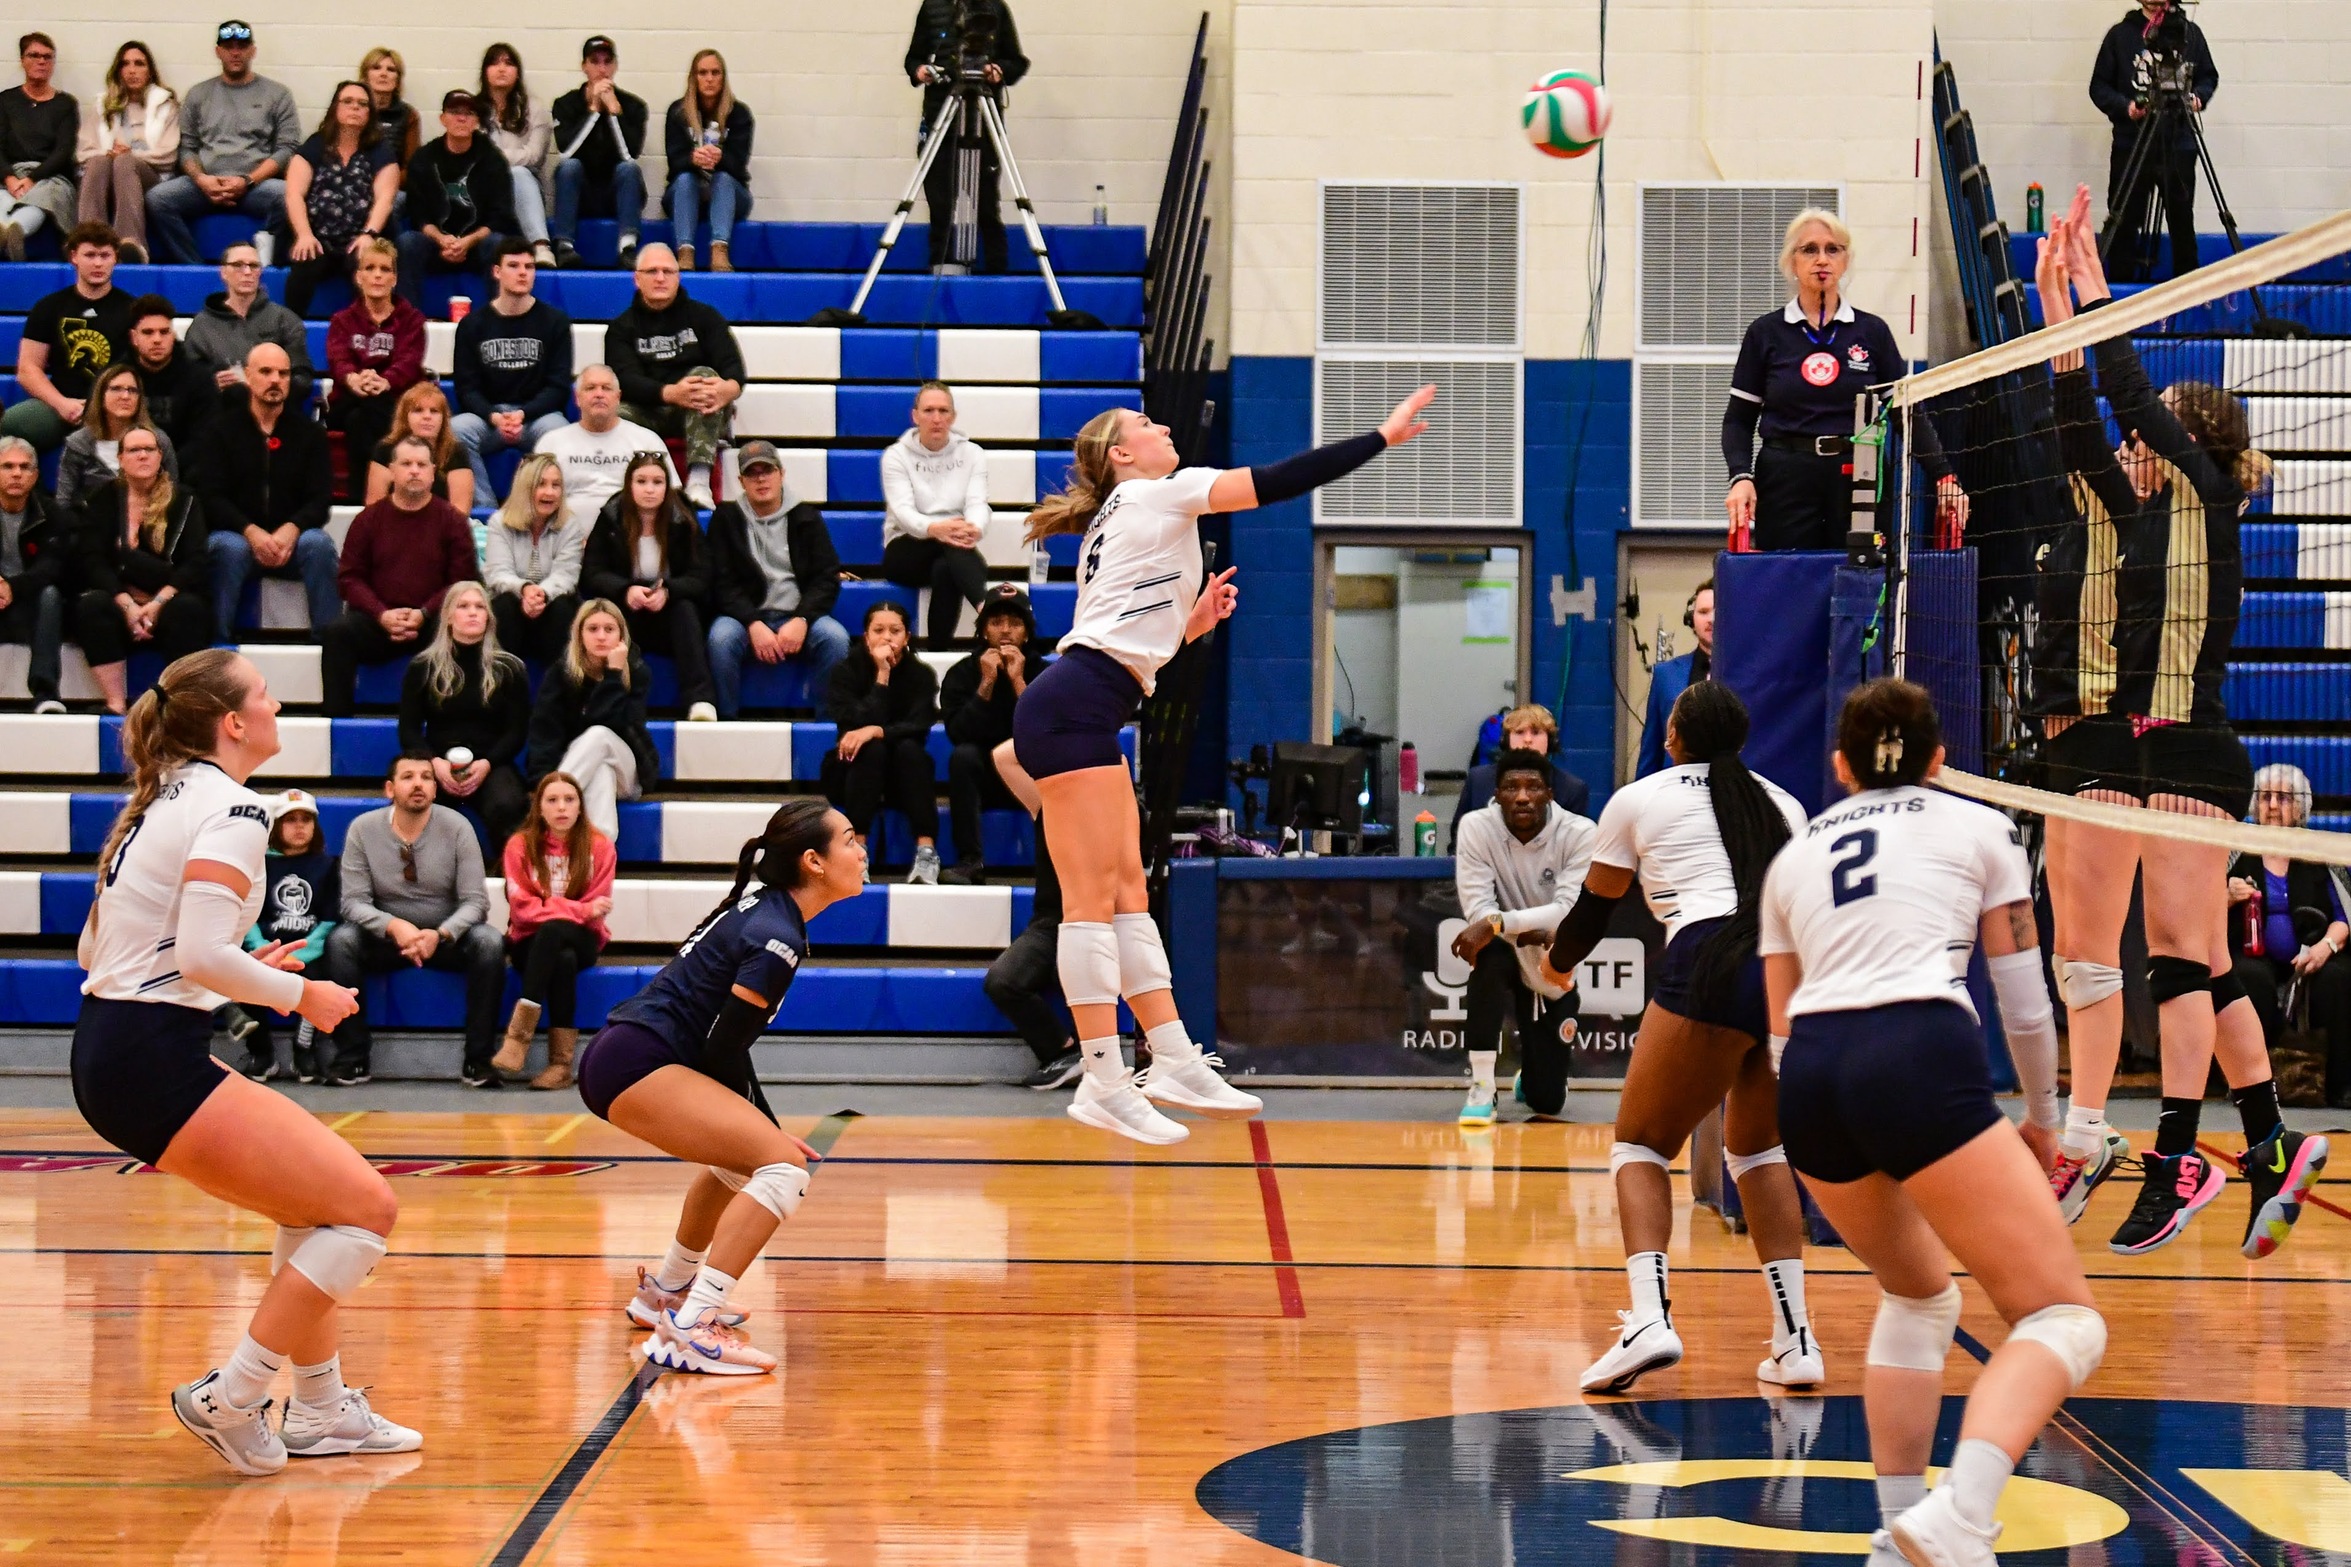 Knights women's volleyball team suffers first loss in home opener